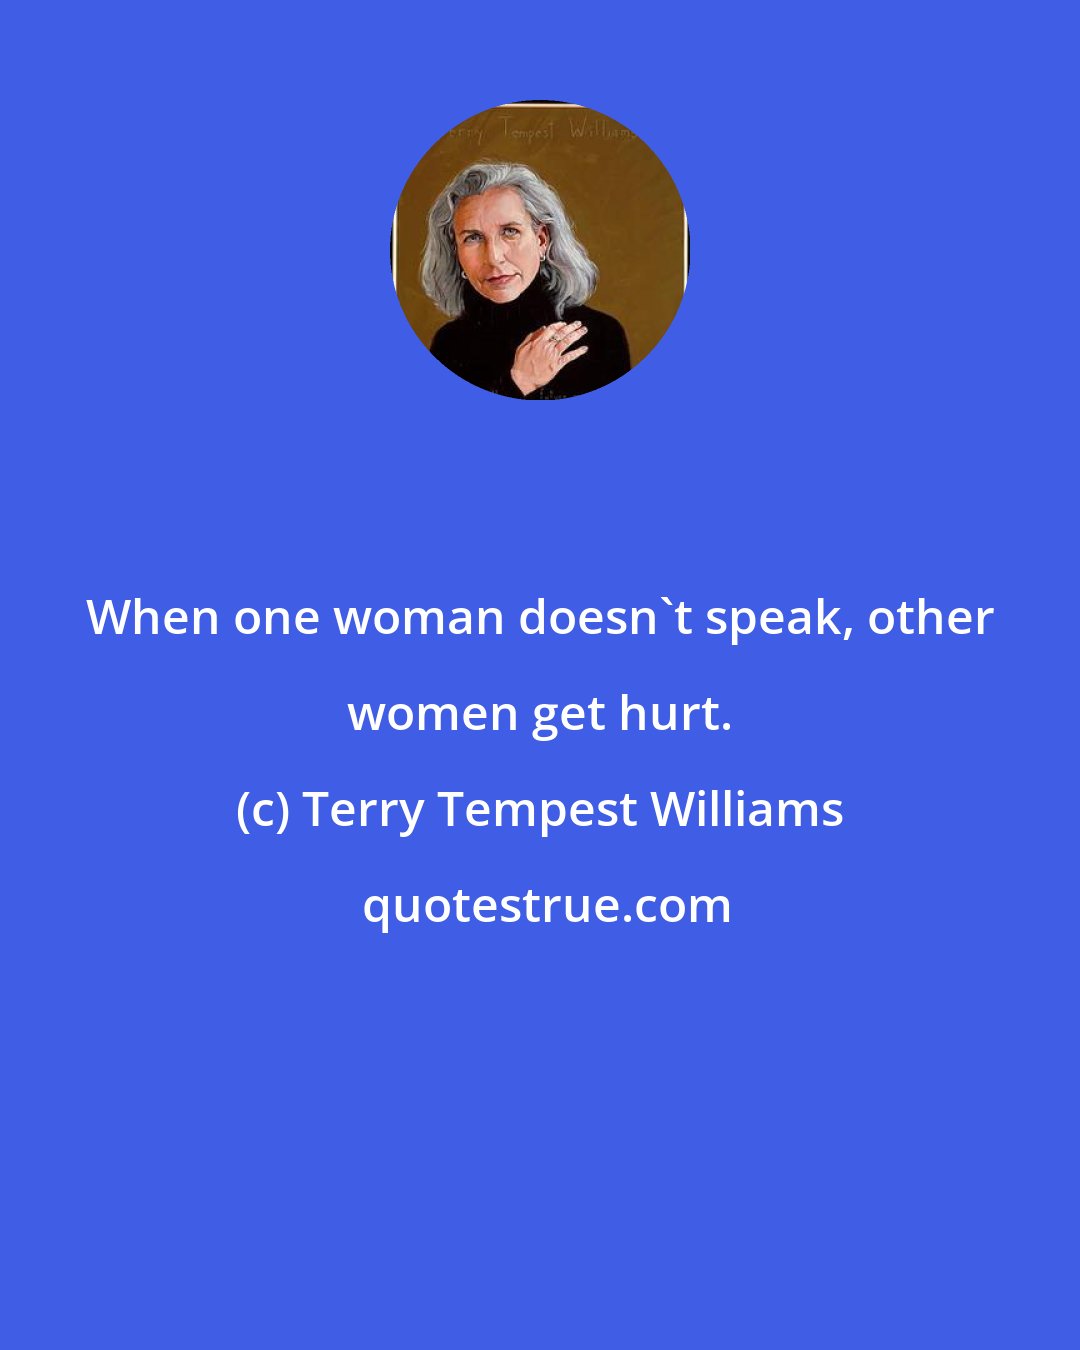 Terry Tempest Williams: When one woman doesn't speak, other women get hurt.